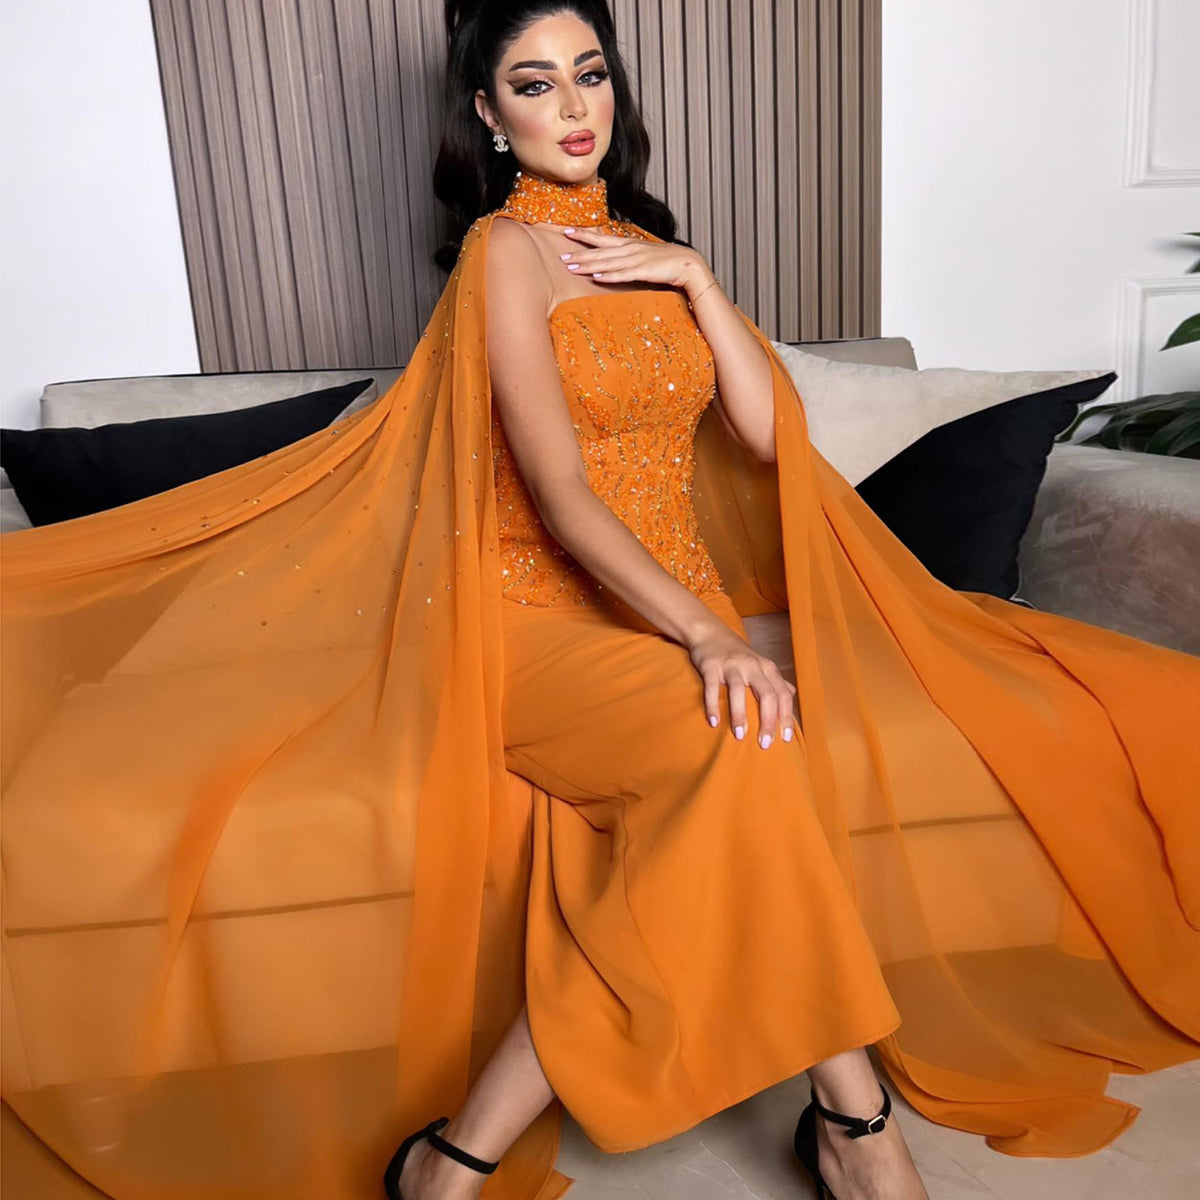 Sharon Said Arabic Orange Strapless Evening Dress with Cape Sleeve Women for Wedding Luxury Dubai Formal Party Gowns SS299